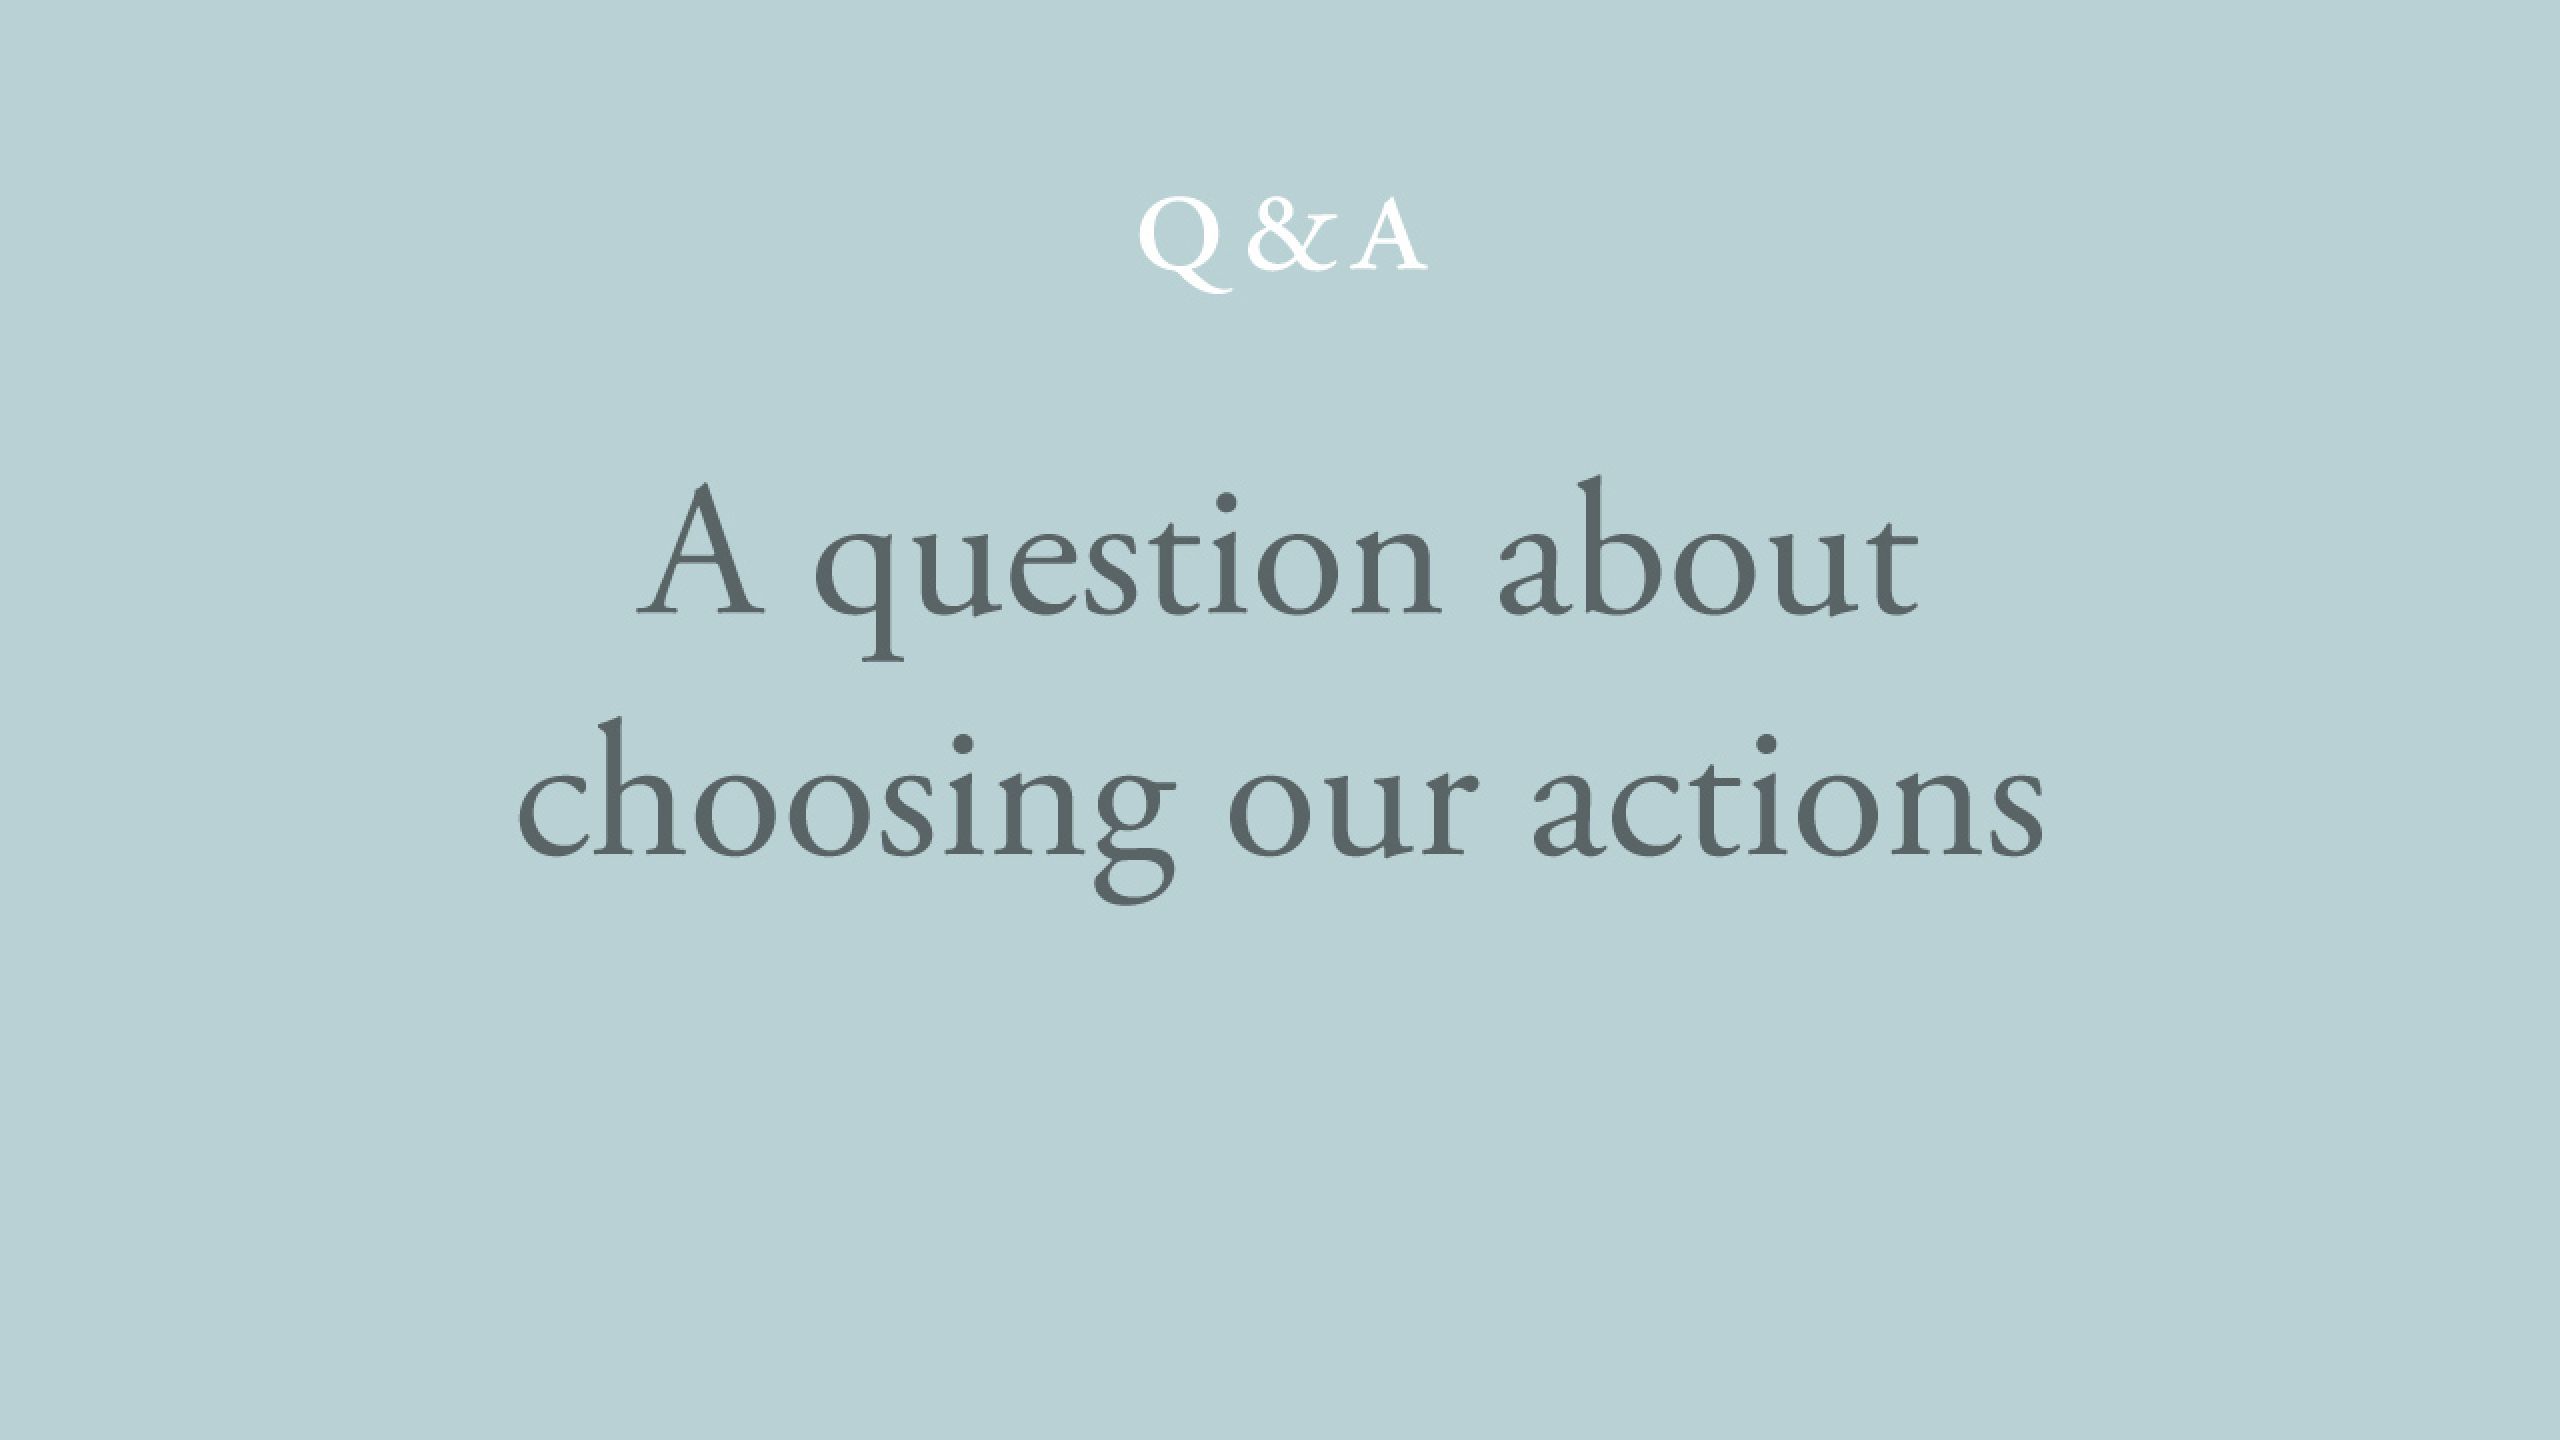 Do we choose which thoughts to act upon?